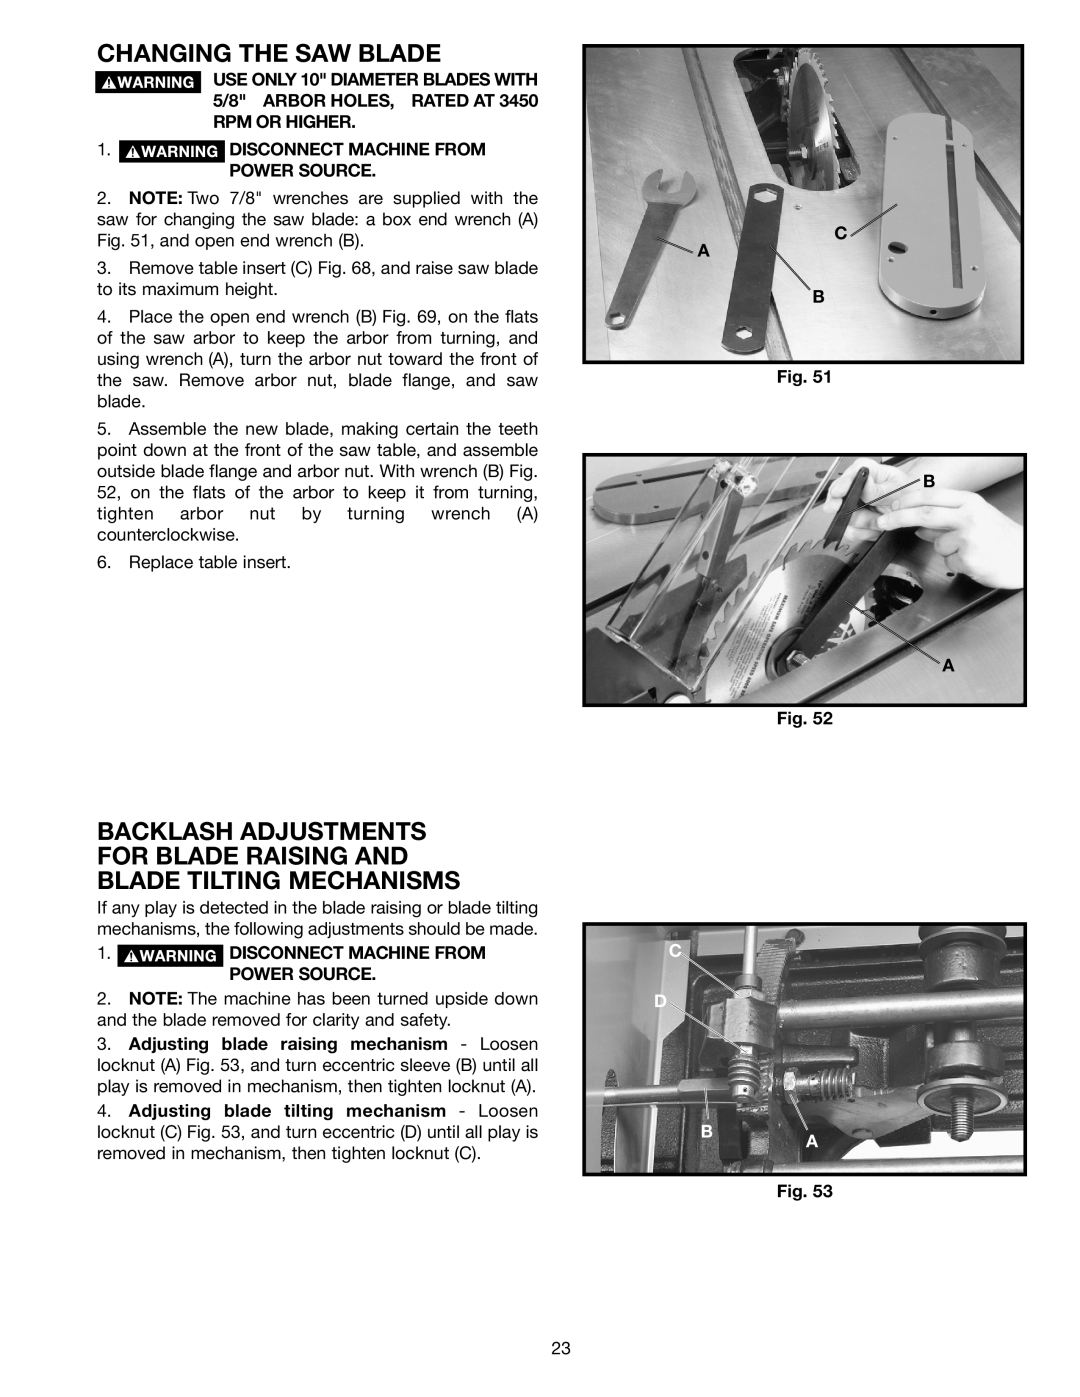 Porter-Cable 36-679 Changing The Saw Blade, Backlash Adjustments For Blade Raising And Blade Tilting Mechanisms, C D B A 